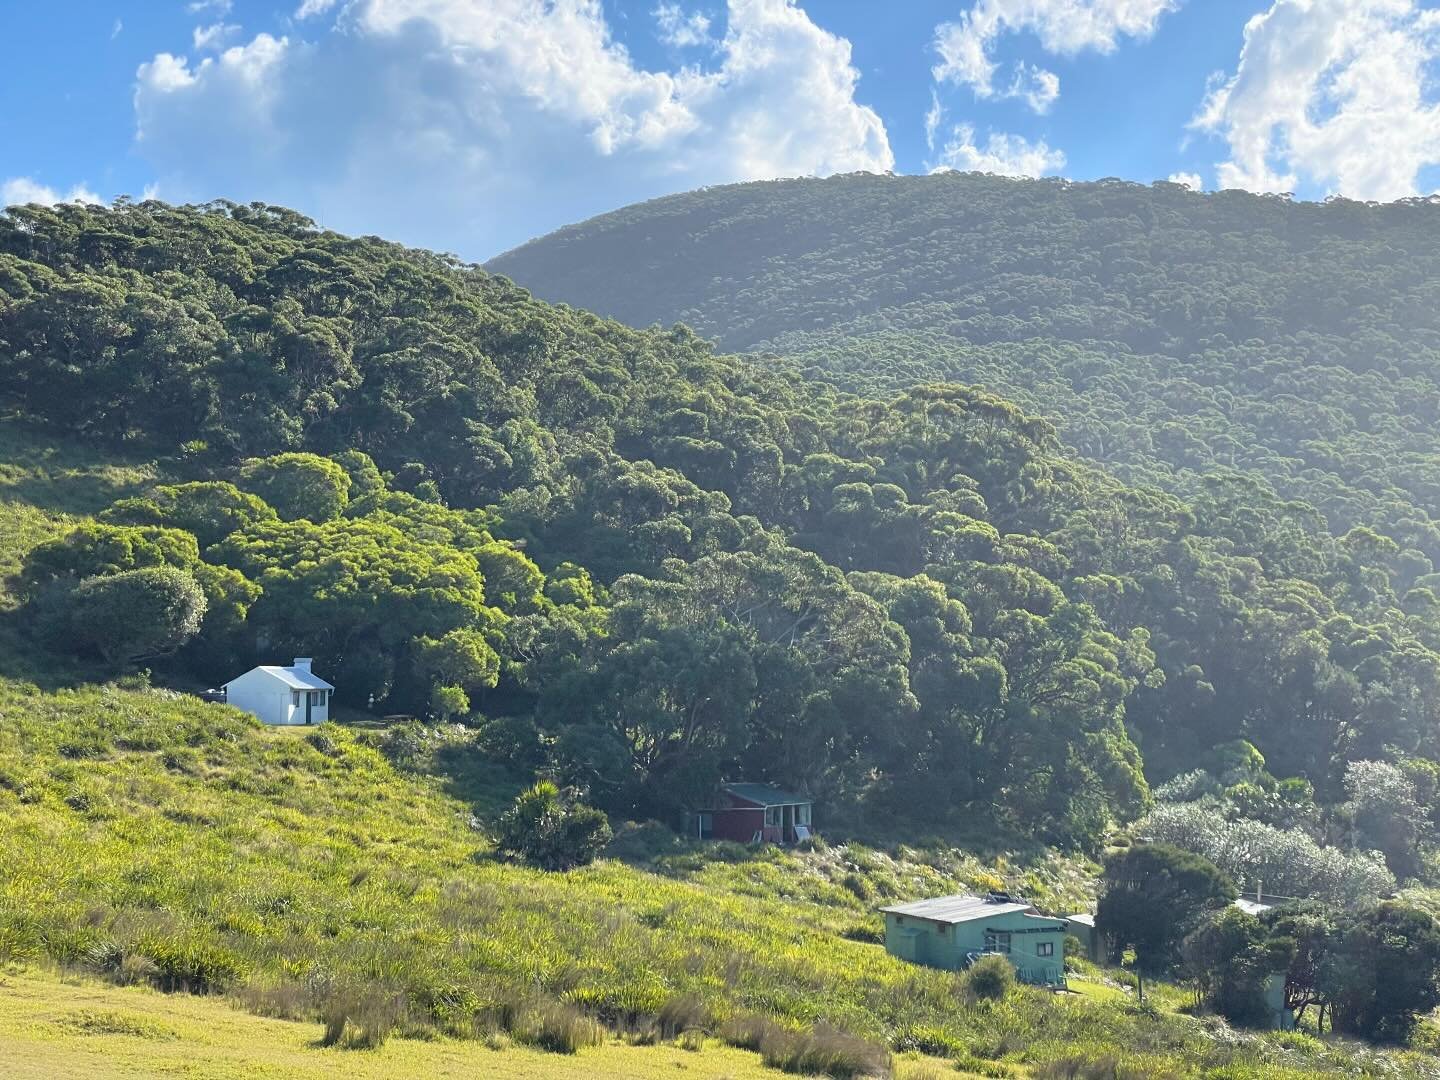 Sundays done right. Royal NP walks.

The heritage-listed cabin communities in the Royal National Park were built from 1930 to 1950 by private citizens using their own initiative, resources and labour. There are no roads, all materials have been carri